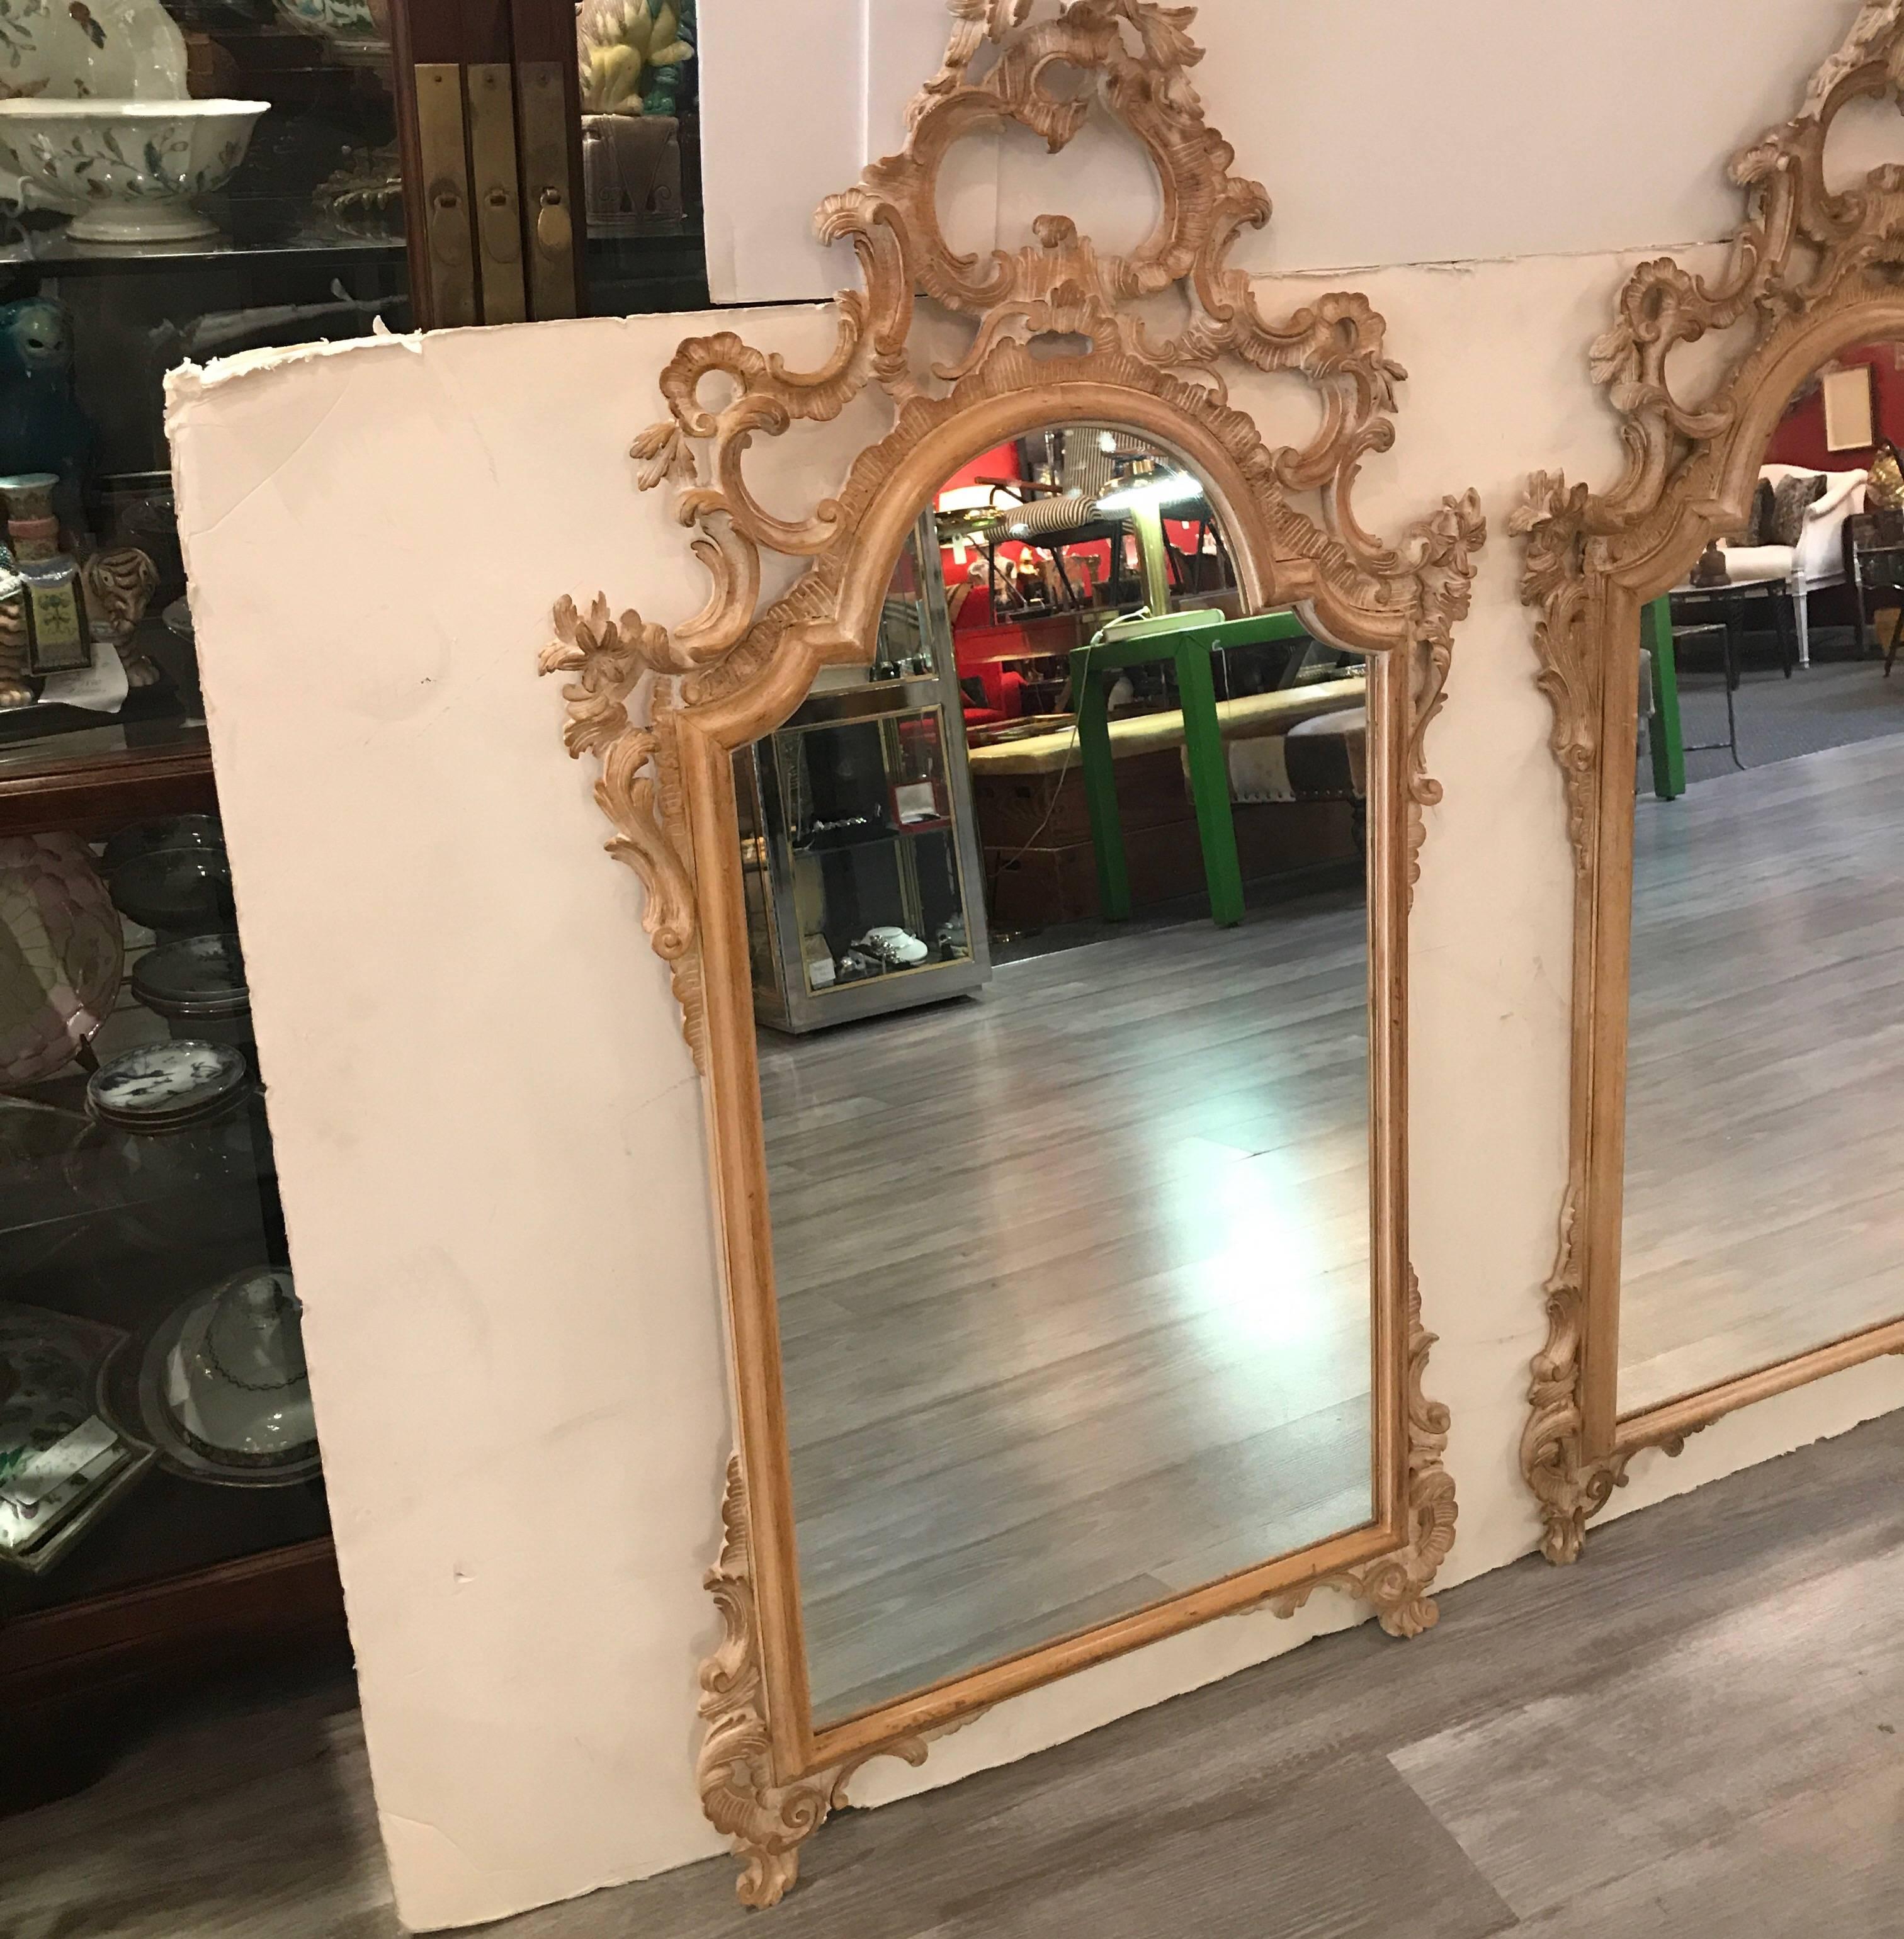 Elaborate pair of blonde and scrubbed finished Rococo mirrors, a rare pair. The Louis XV style but with a light and fresh lighter wood finish. Made in Italy, circa 1970s.